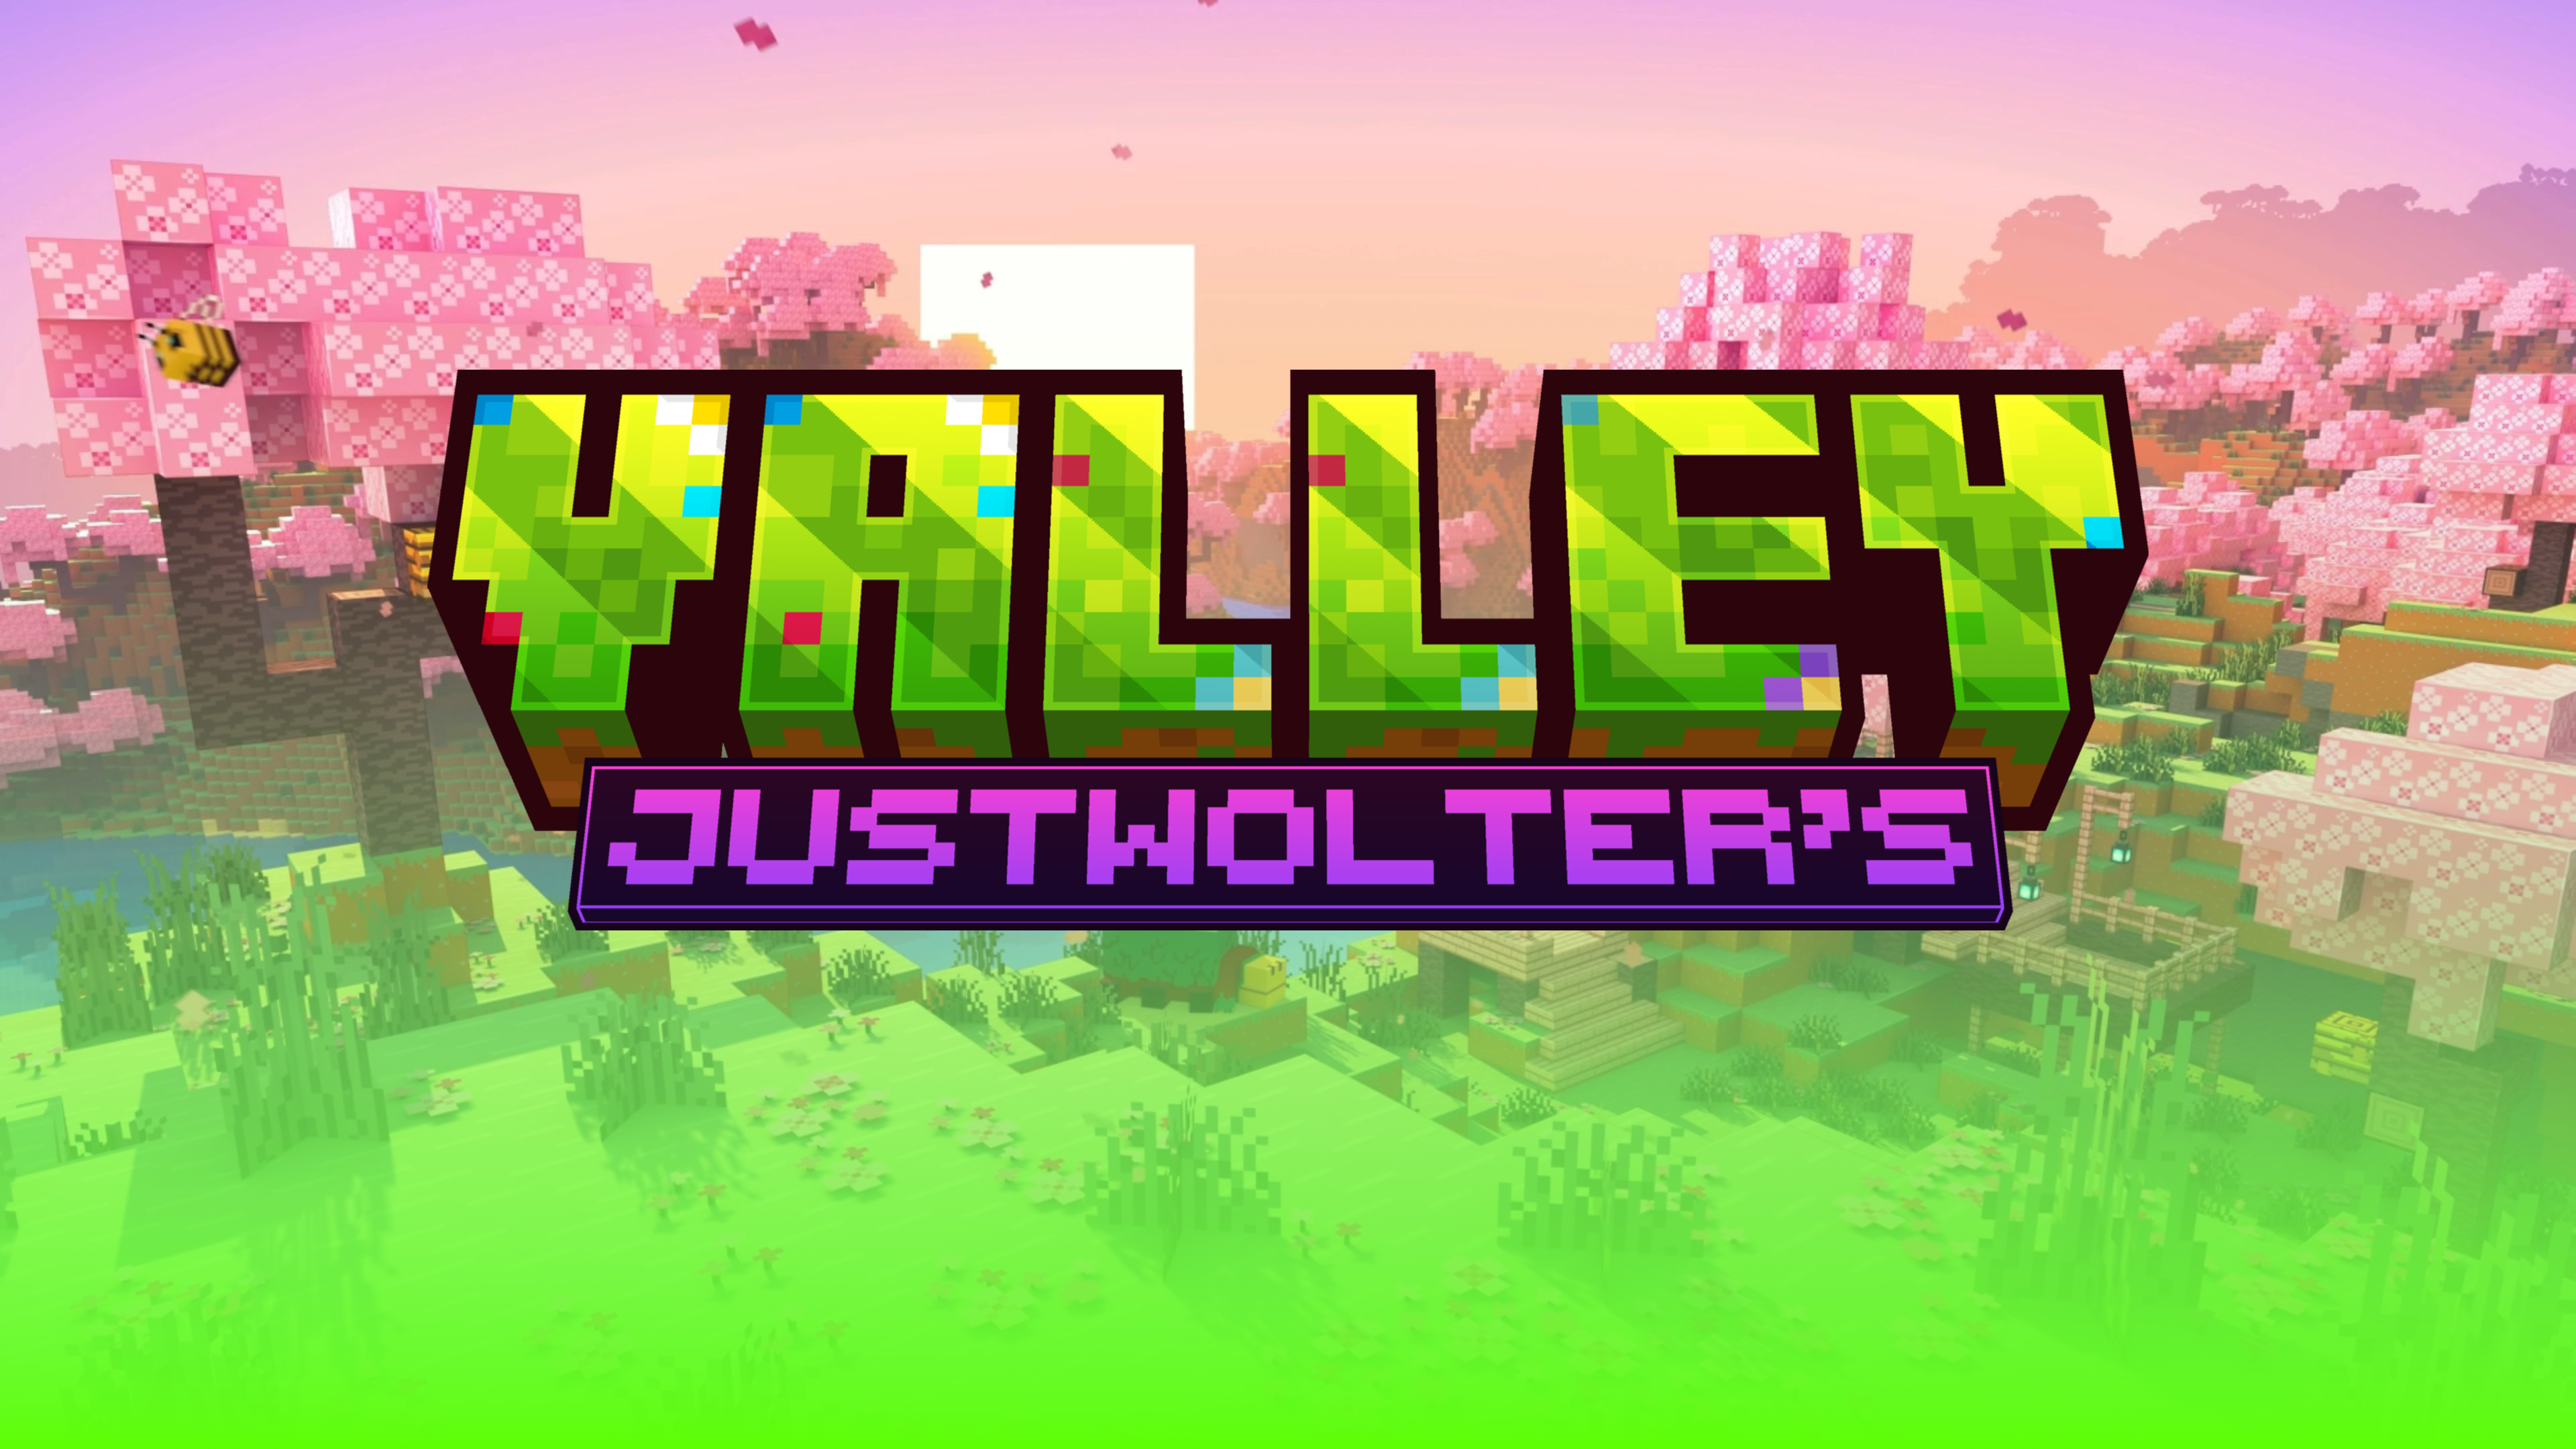 Valley!